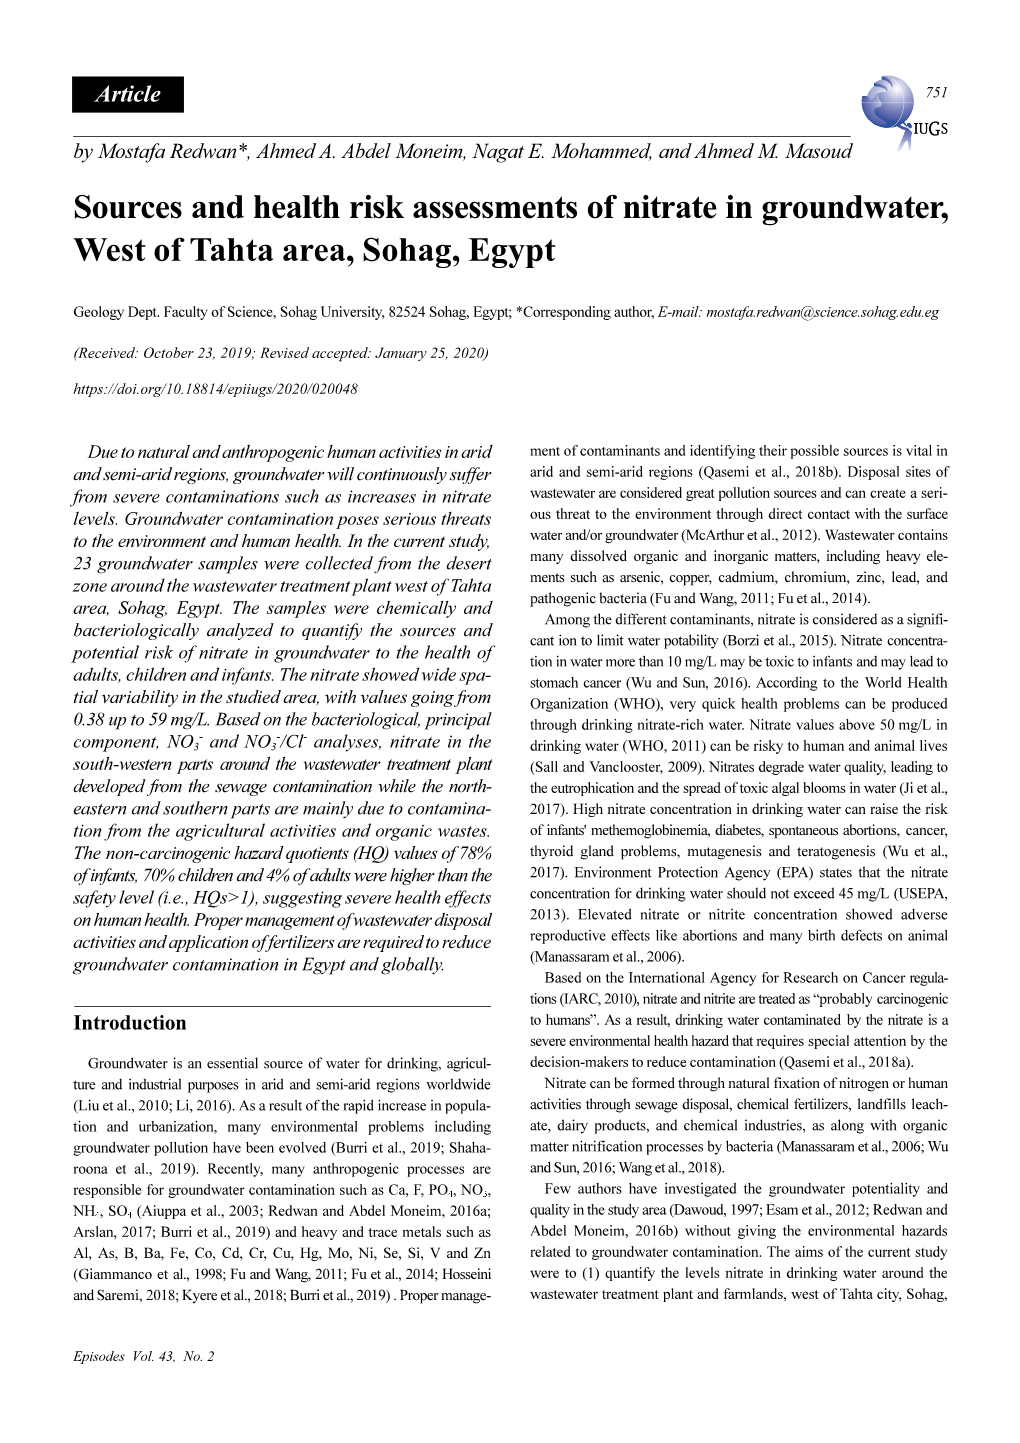 Sources and Health Risk Assessments of Nitrate in Groundwater, West of Tahta Area, Sohag, Egypt